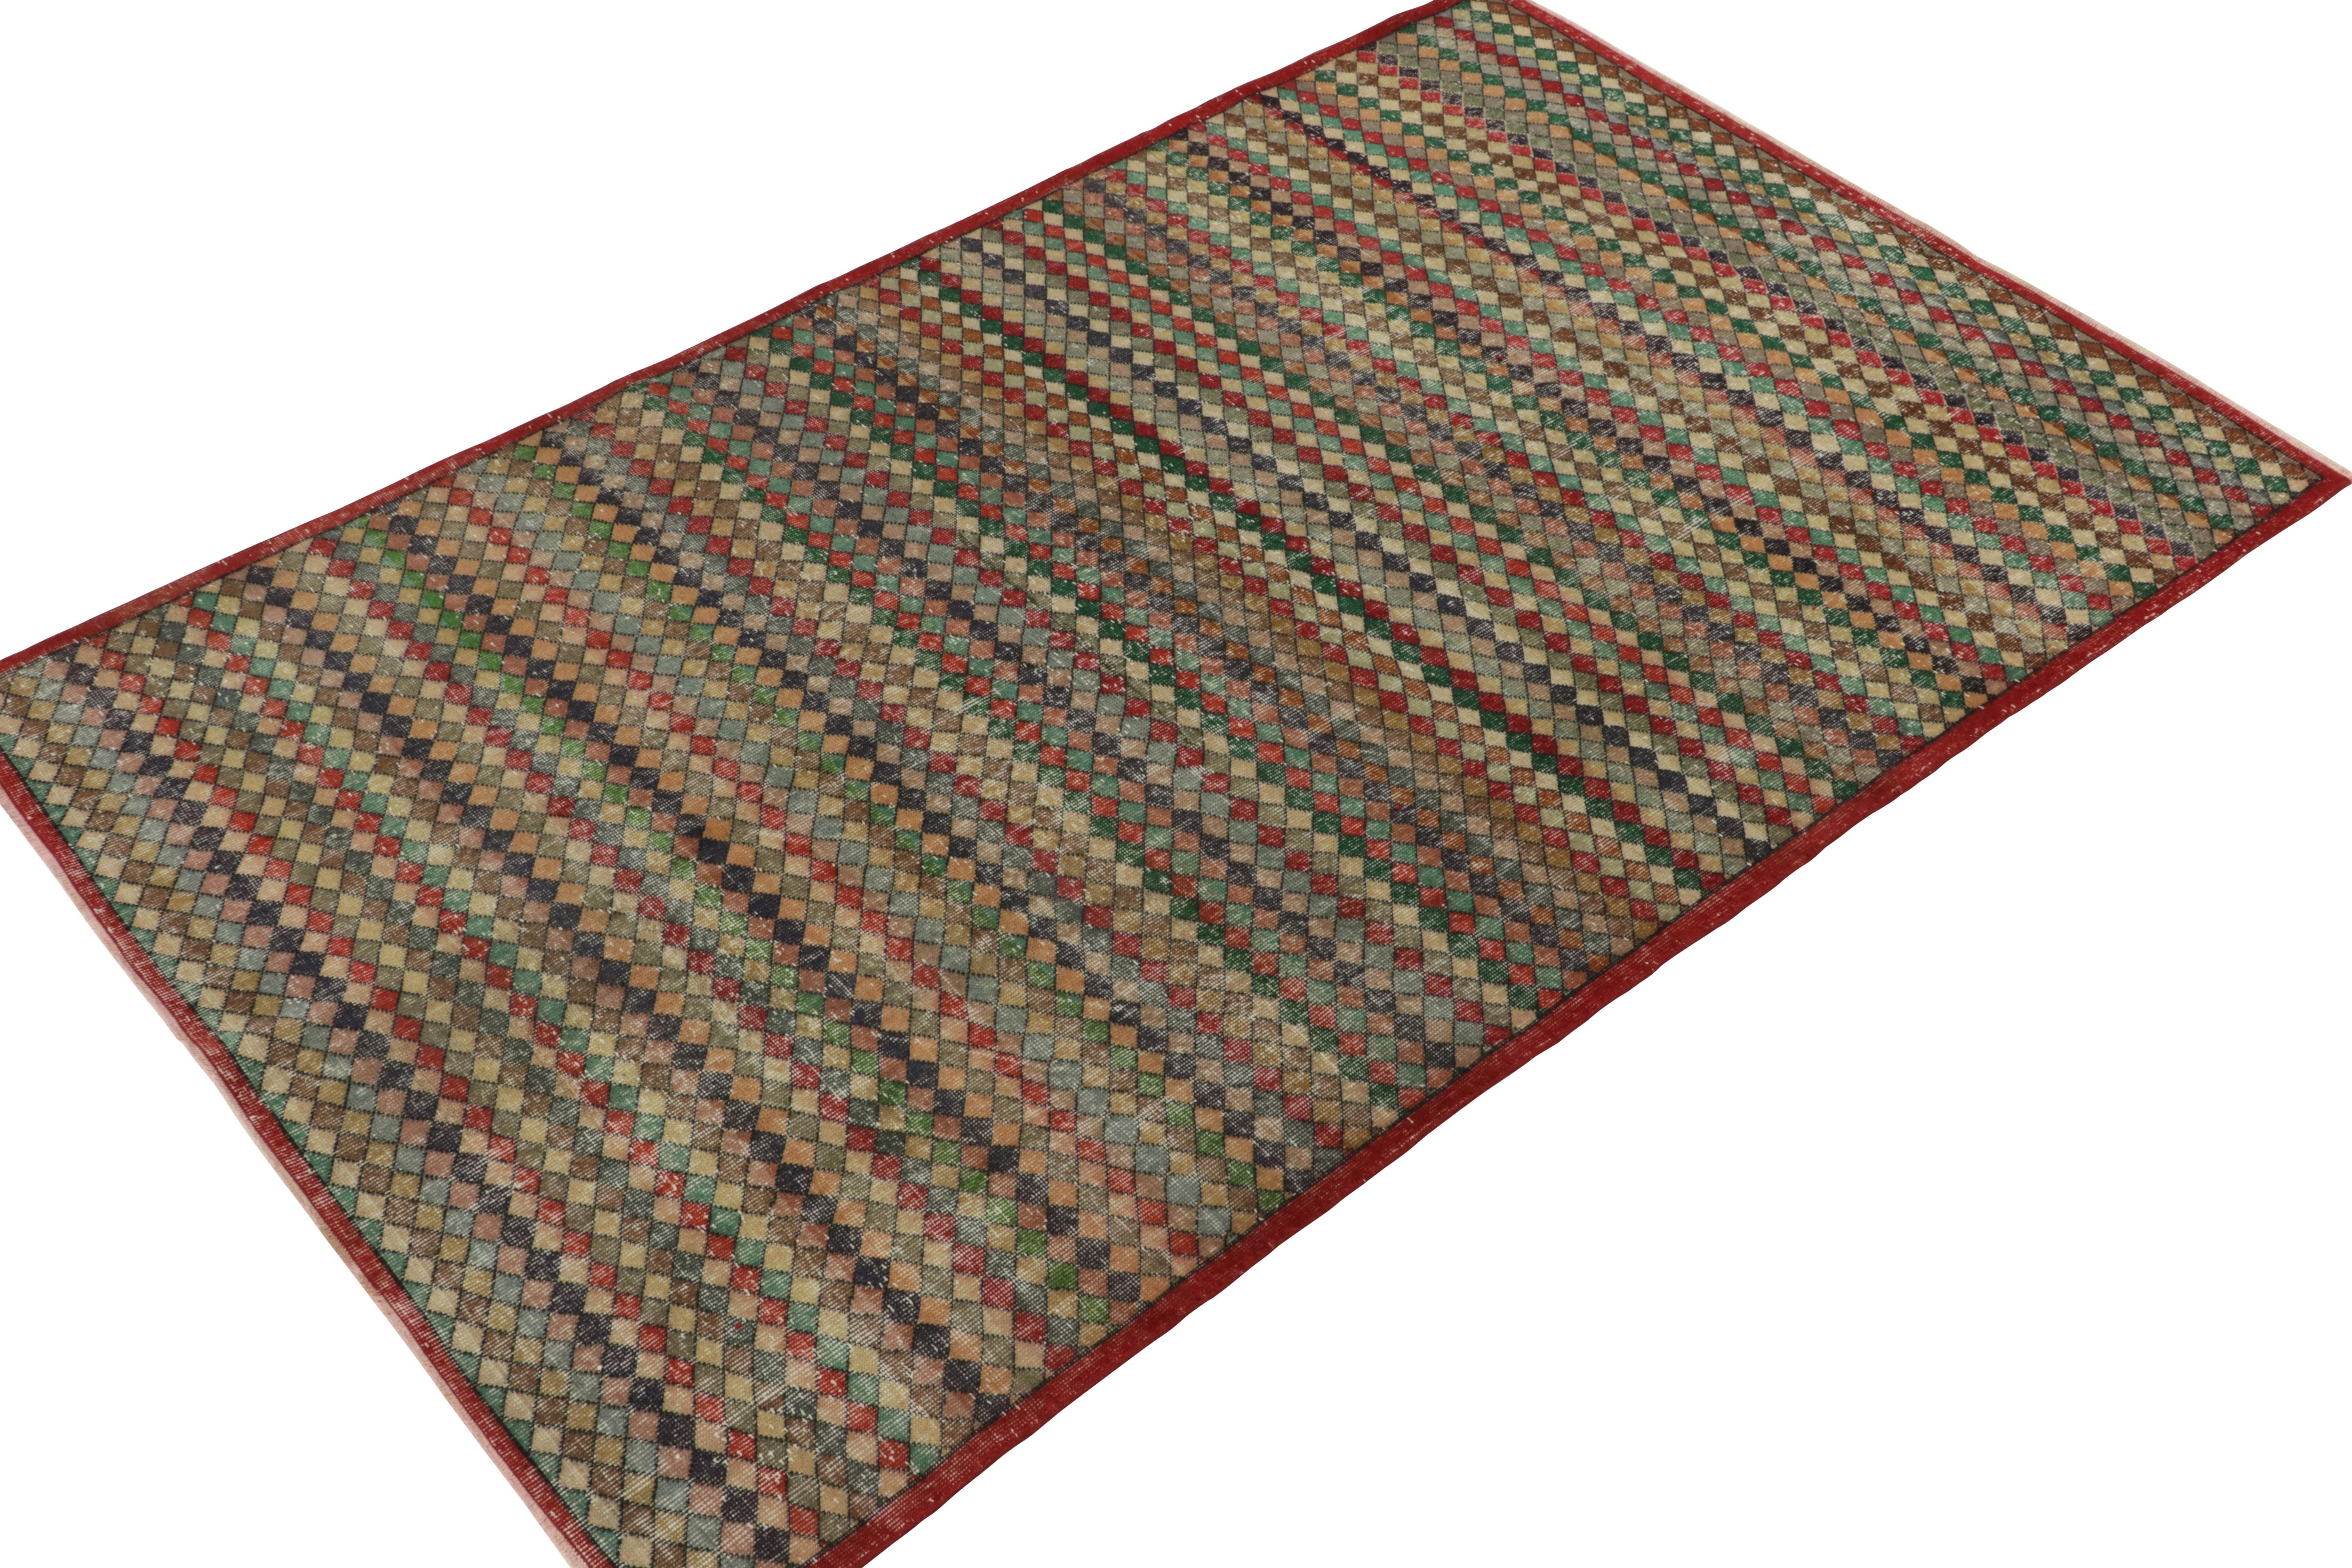 Mid-Century Modern 1960s Vintage Art Deco Rug in Multicolor and Geometric Patterns by Rug & Kilim For Sale